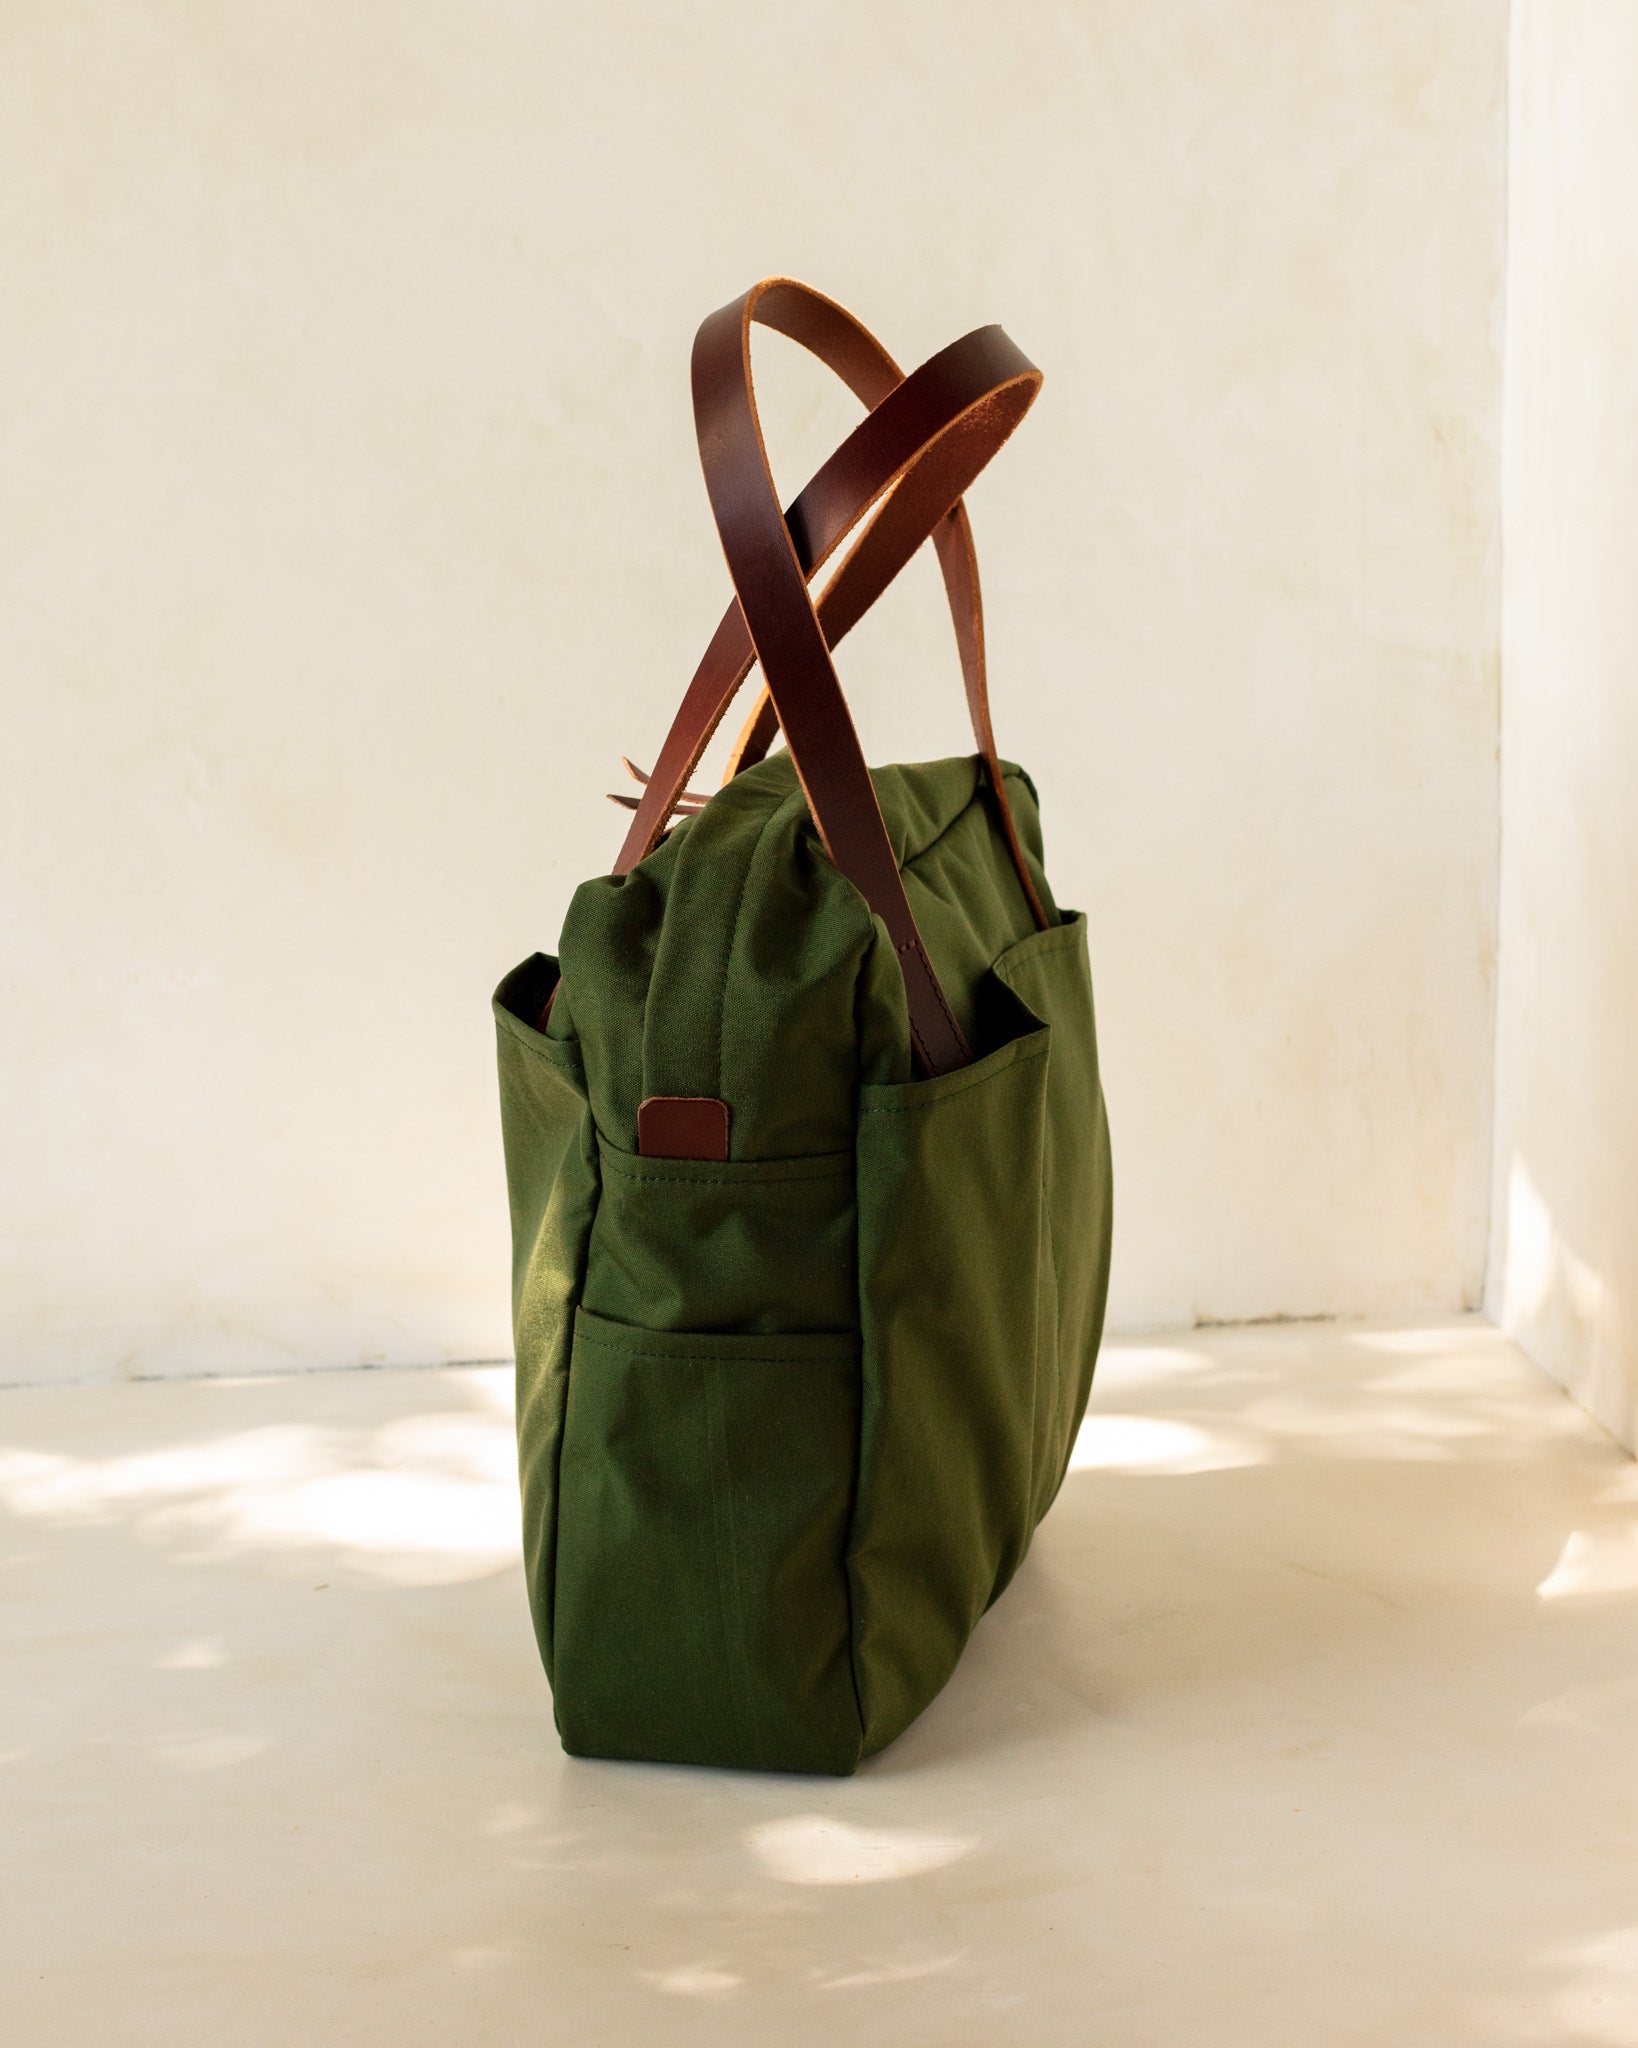 Large Olive Green Canvas Utility Tote Bag